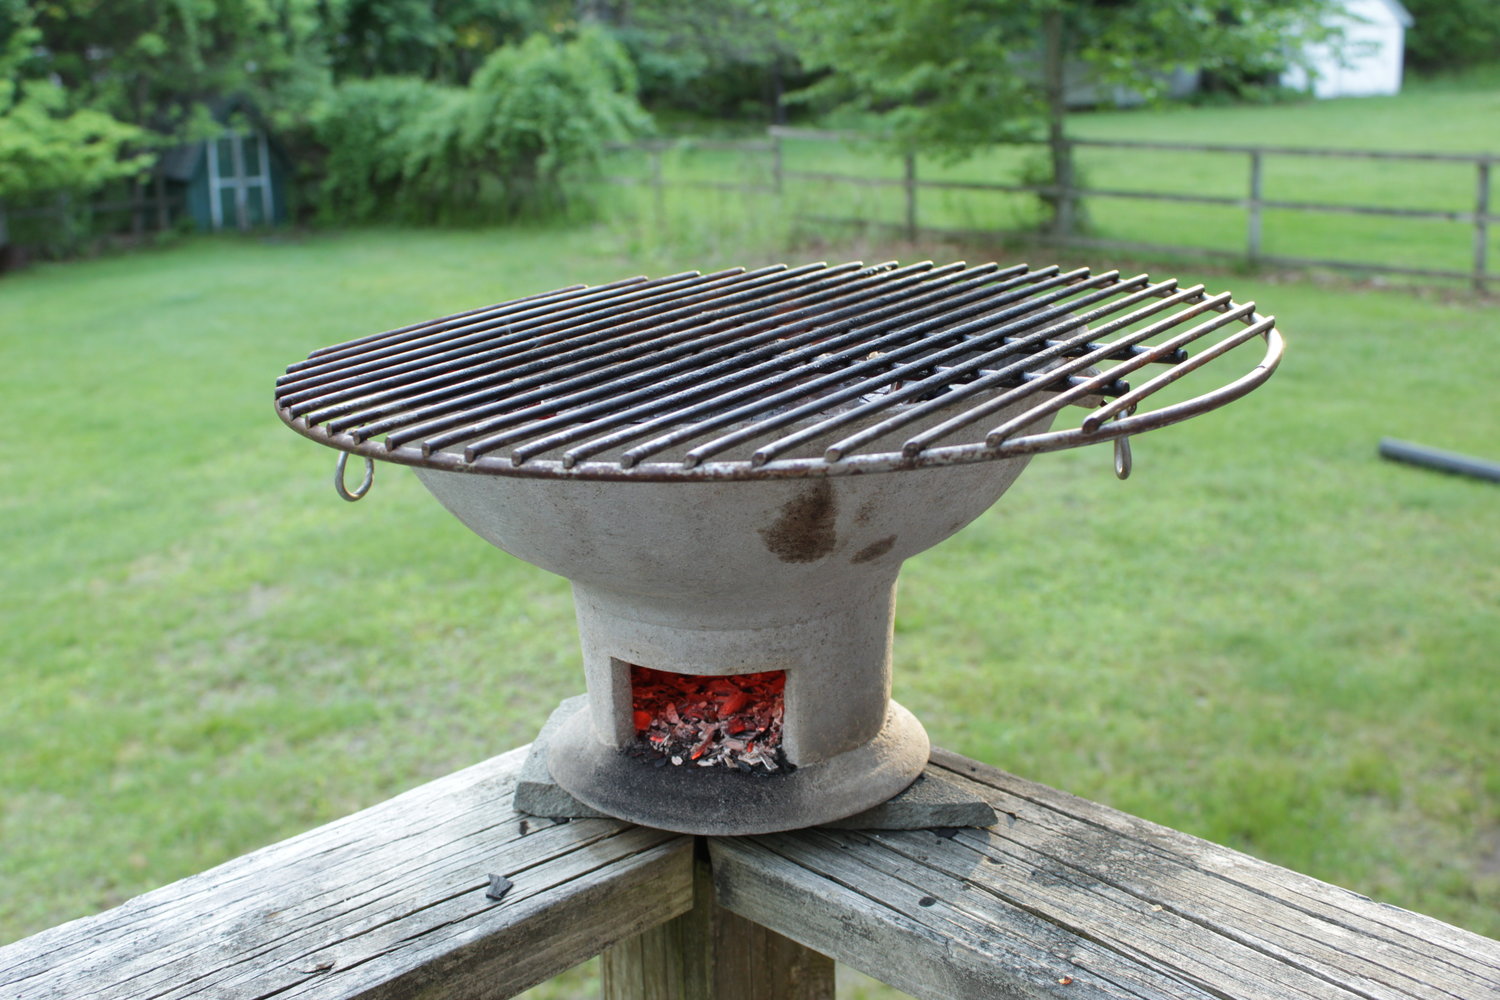 A coal pot, basin-shaped and containing coals, with a rack for grilling. They can be cast iron or clay. Enormously popular in the Caribbean, coal pots came from Africa or India and can cook delicious food in the Islands... or here in the Delaware River Valley.